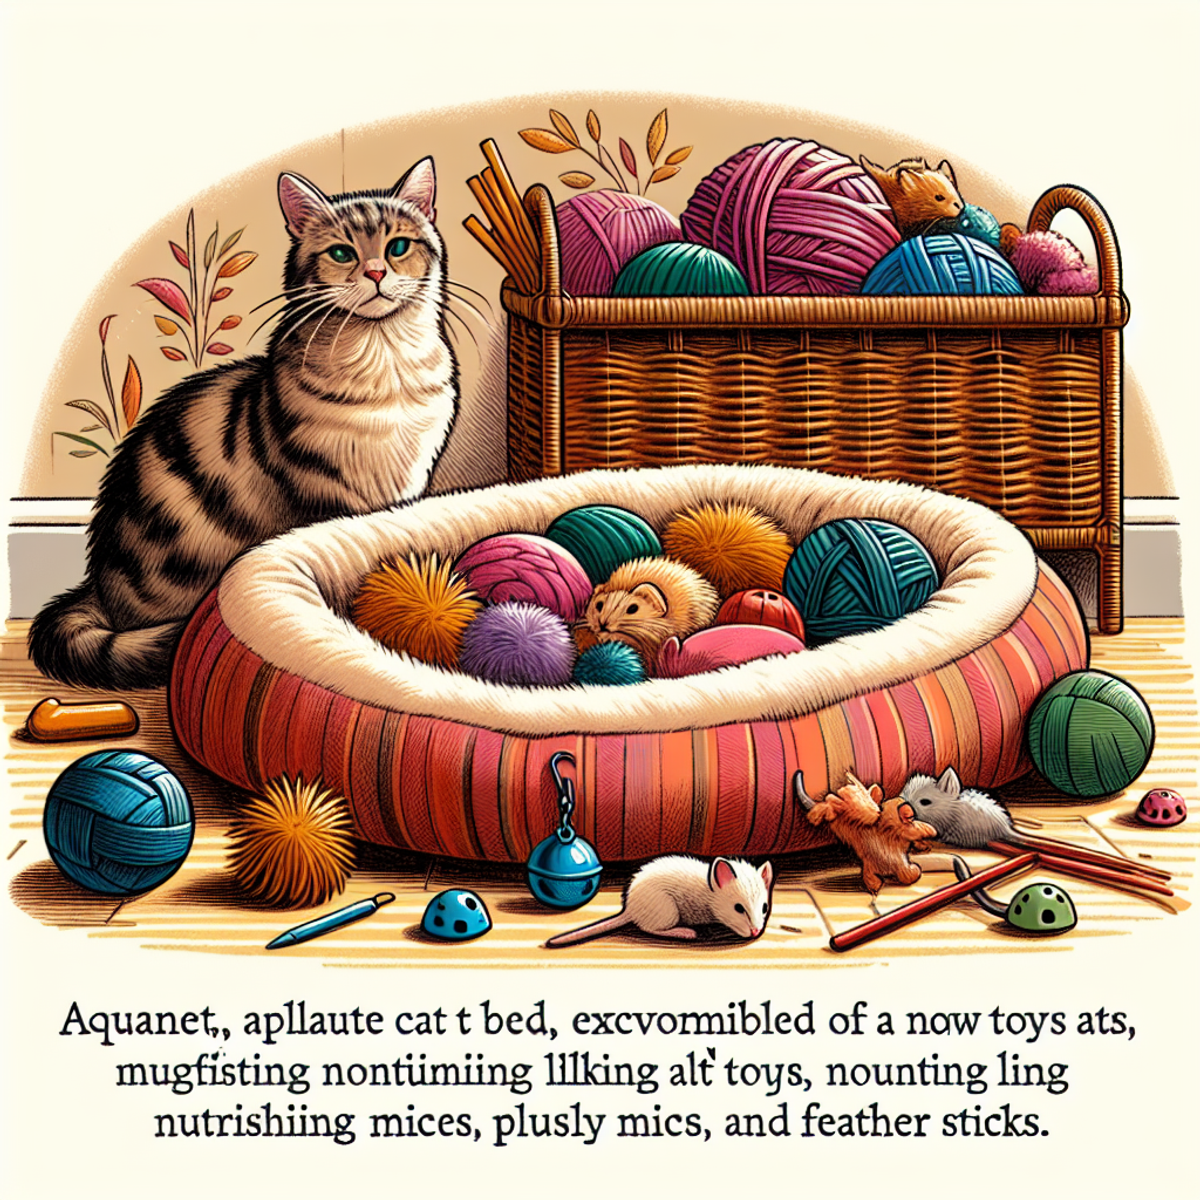 Cozy cat bed surrounded by colorful toys for elderly felines.